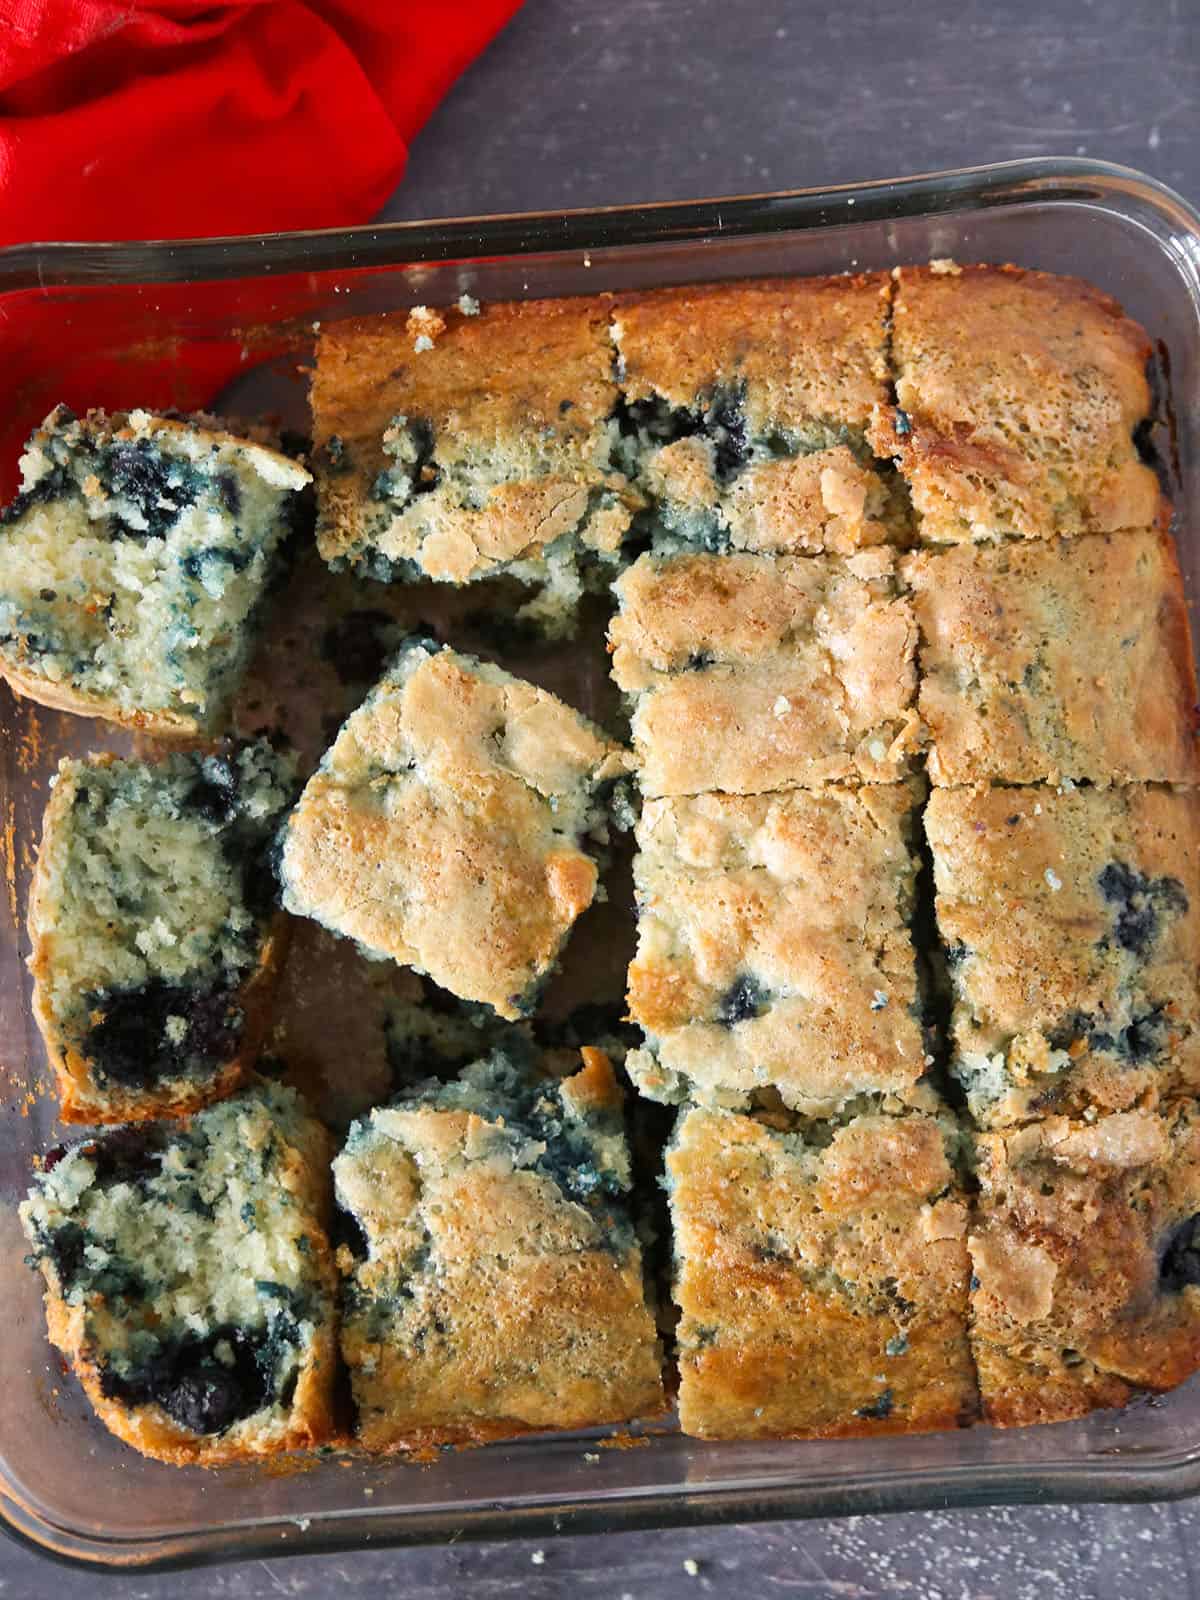 Sliced Blueberry Breakfast Cakes in a baking dish.